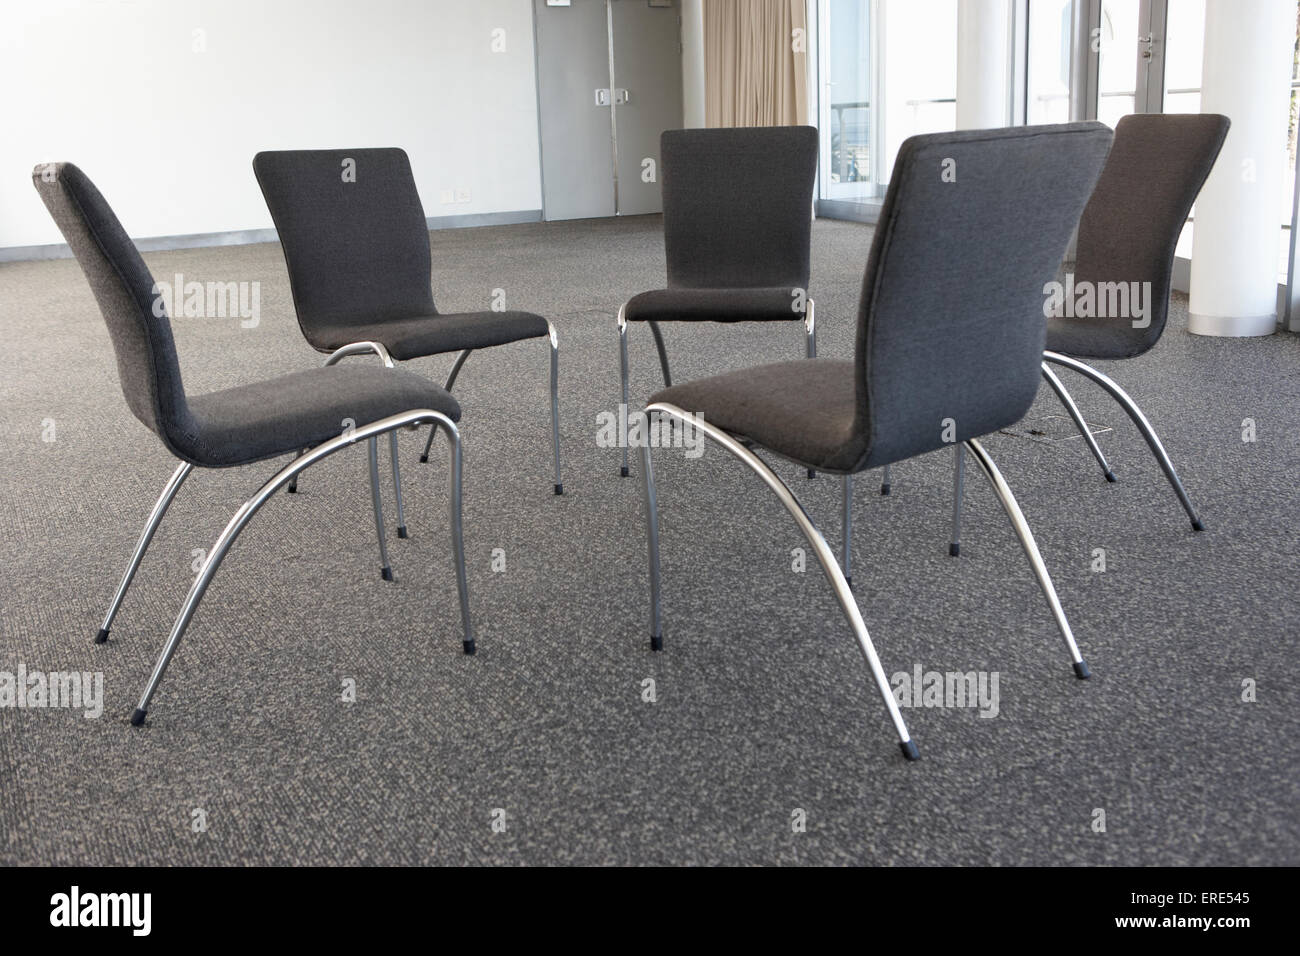 Empty Chairs Laid Out For Meeting Stock Photo